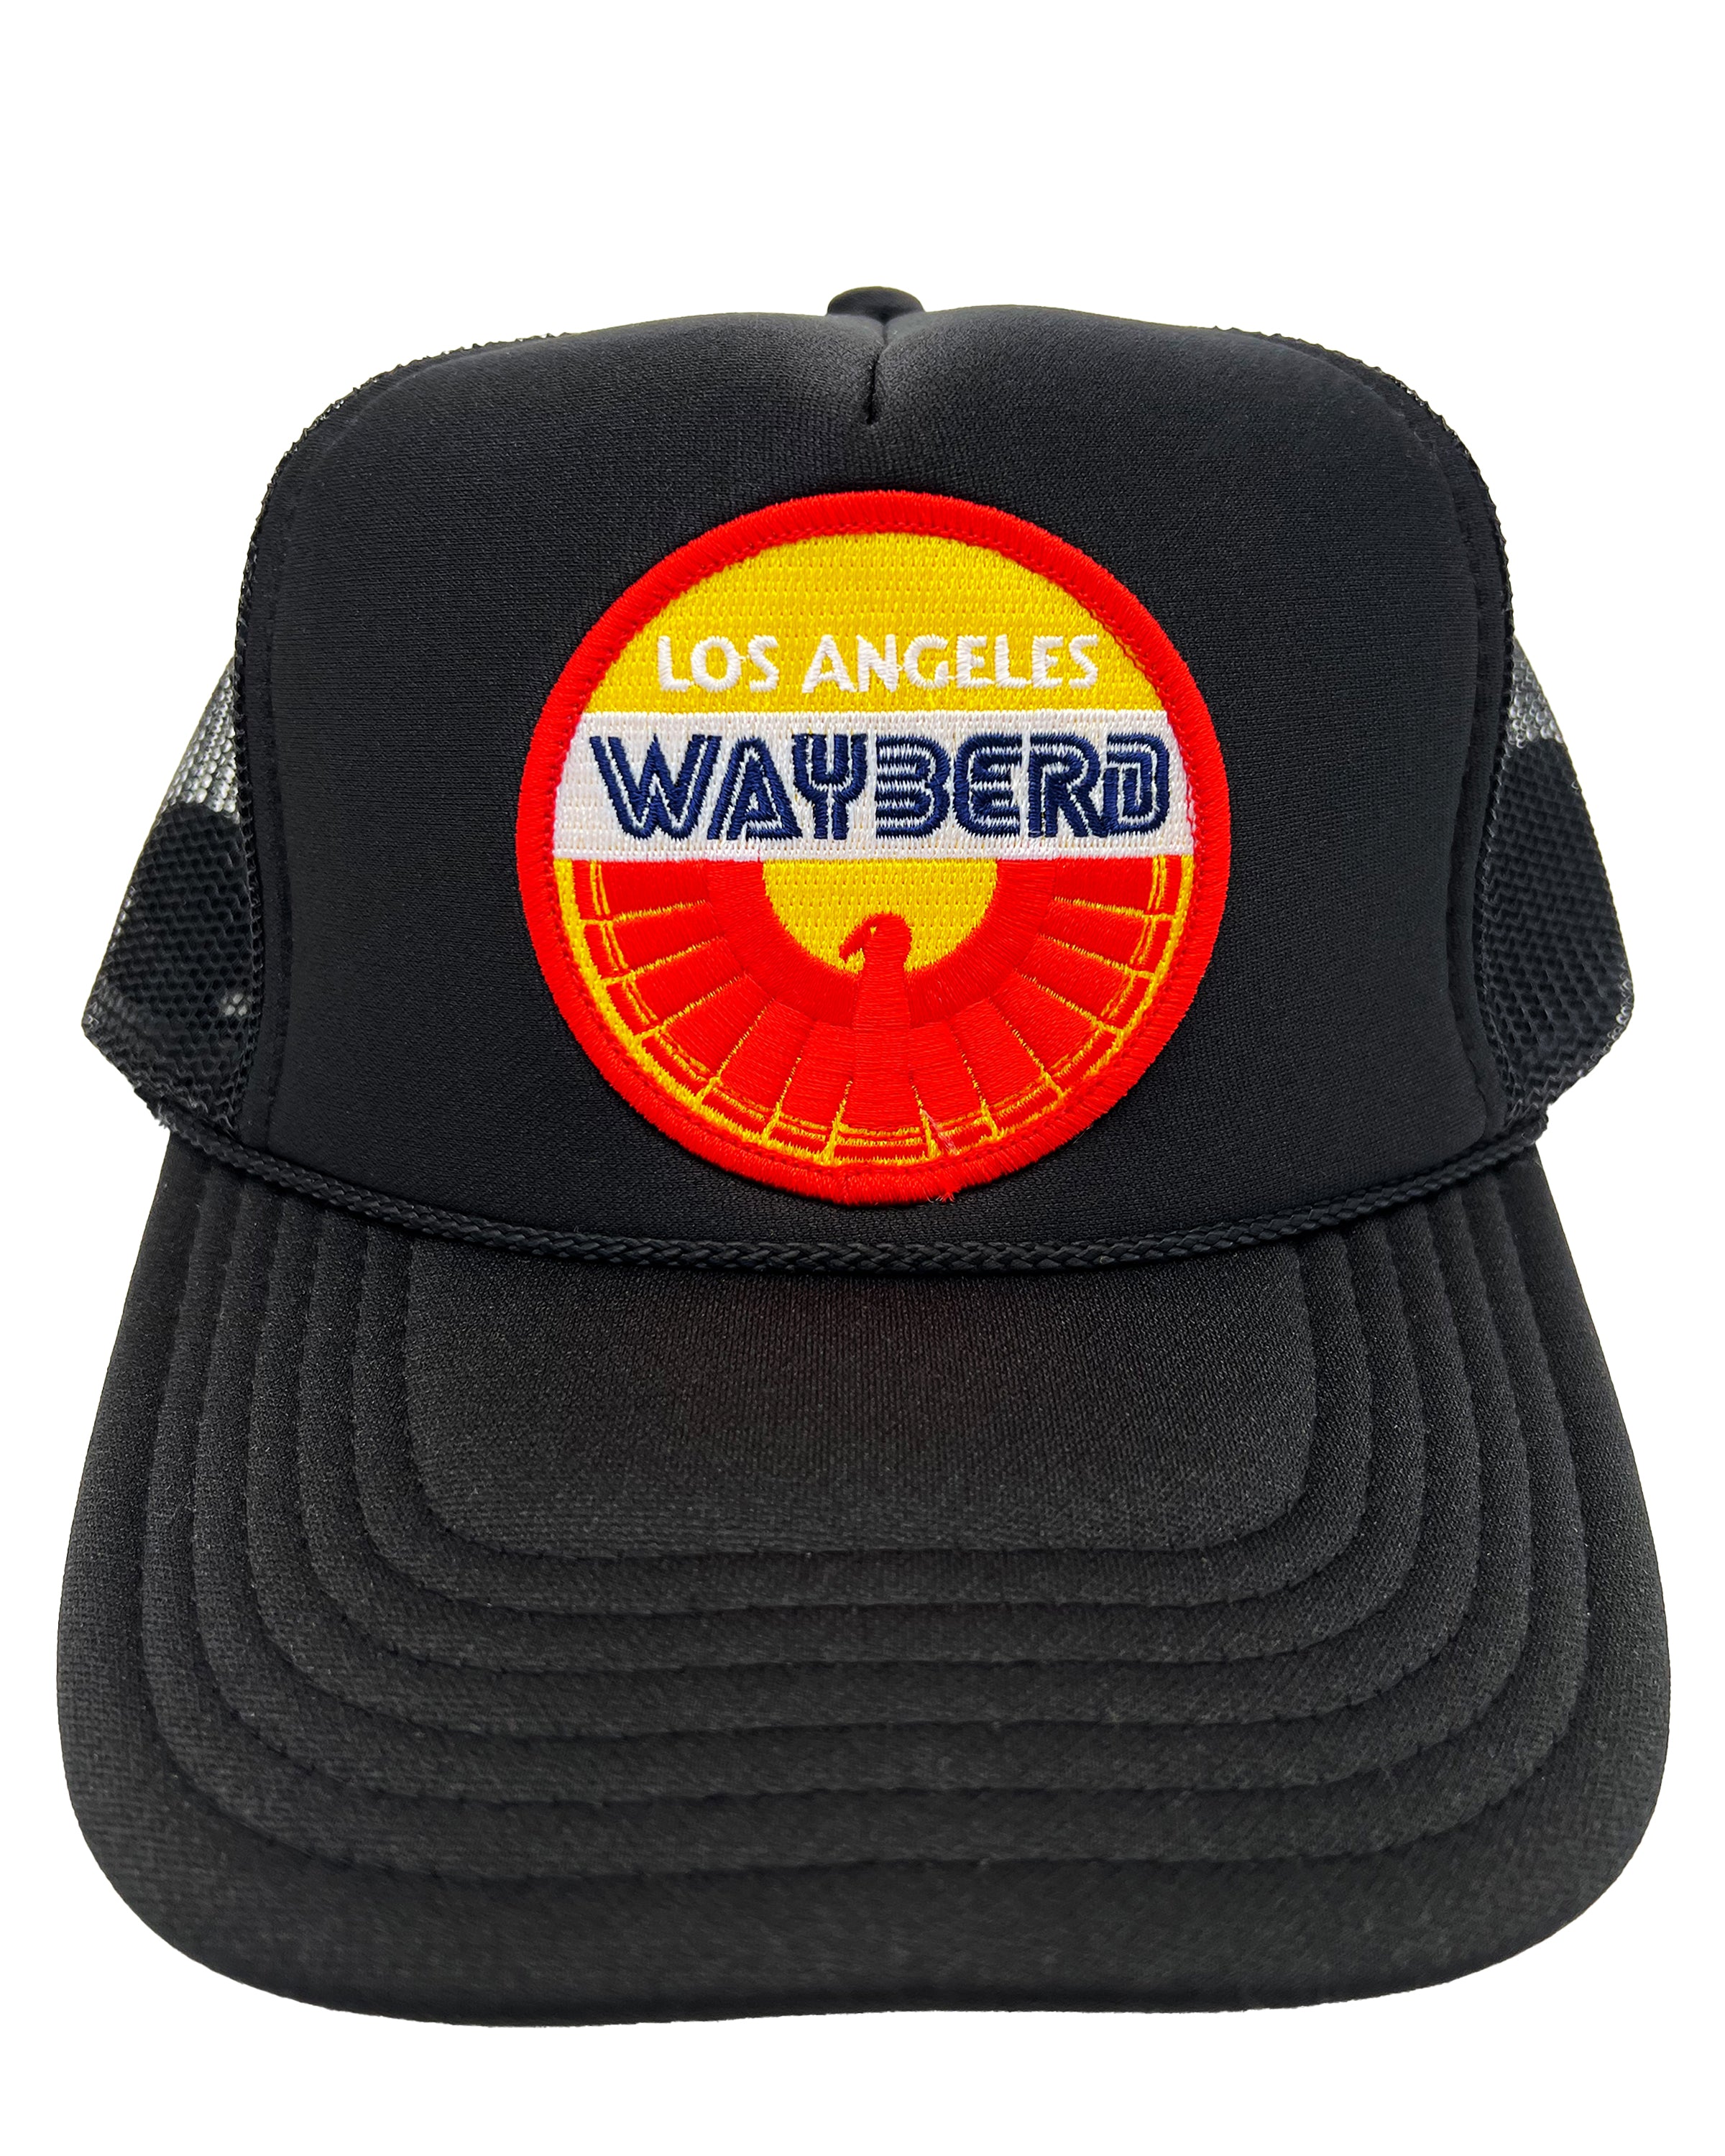 Aviator Nation Embroidered Patch Trucker Hat - Black Hats